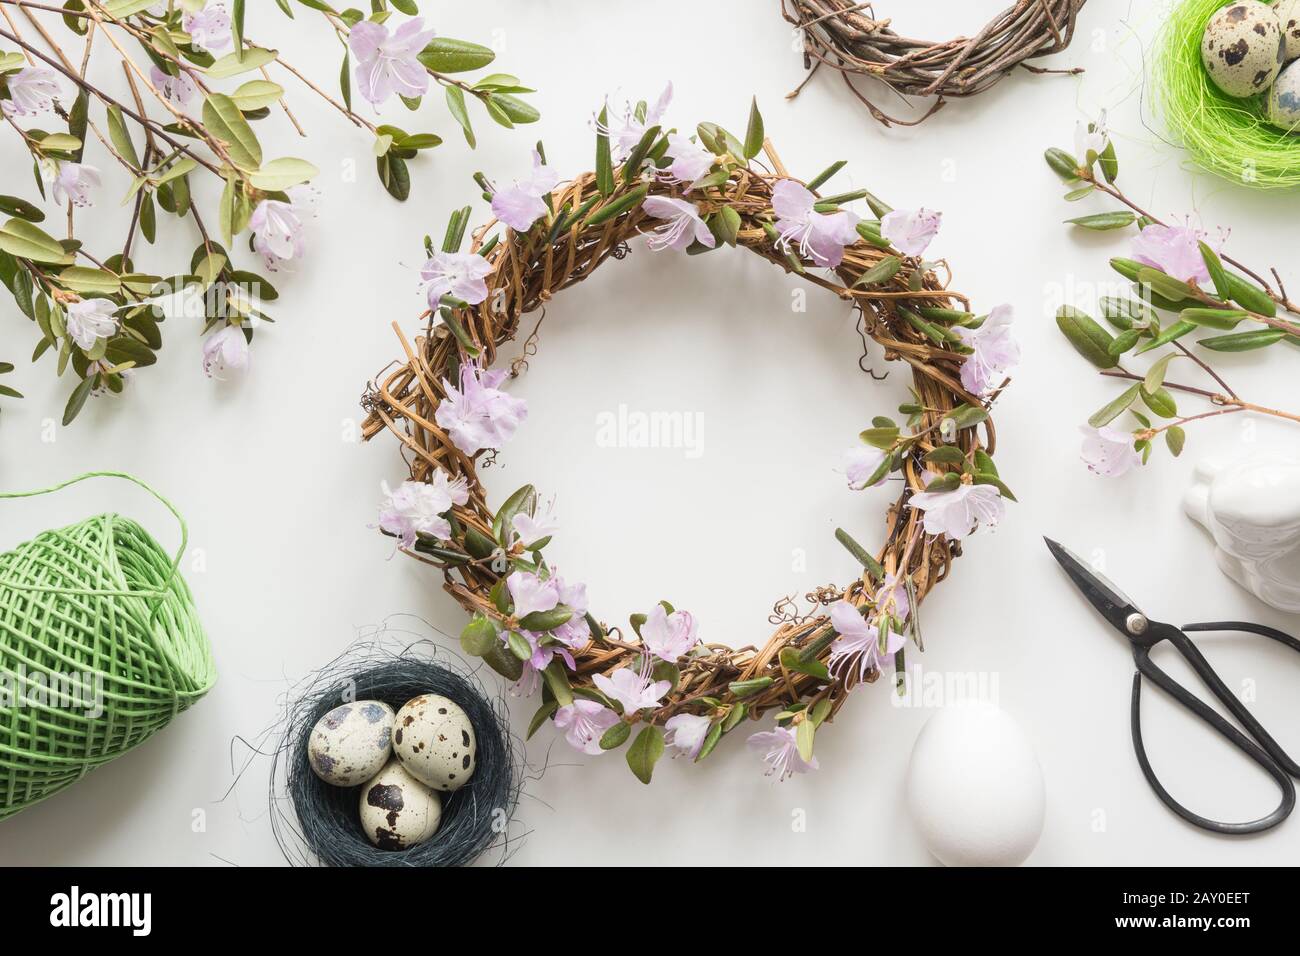 Spring wreath with flowers on light. Creative flat lay. Top view. Decor handmade. Stock Photo